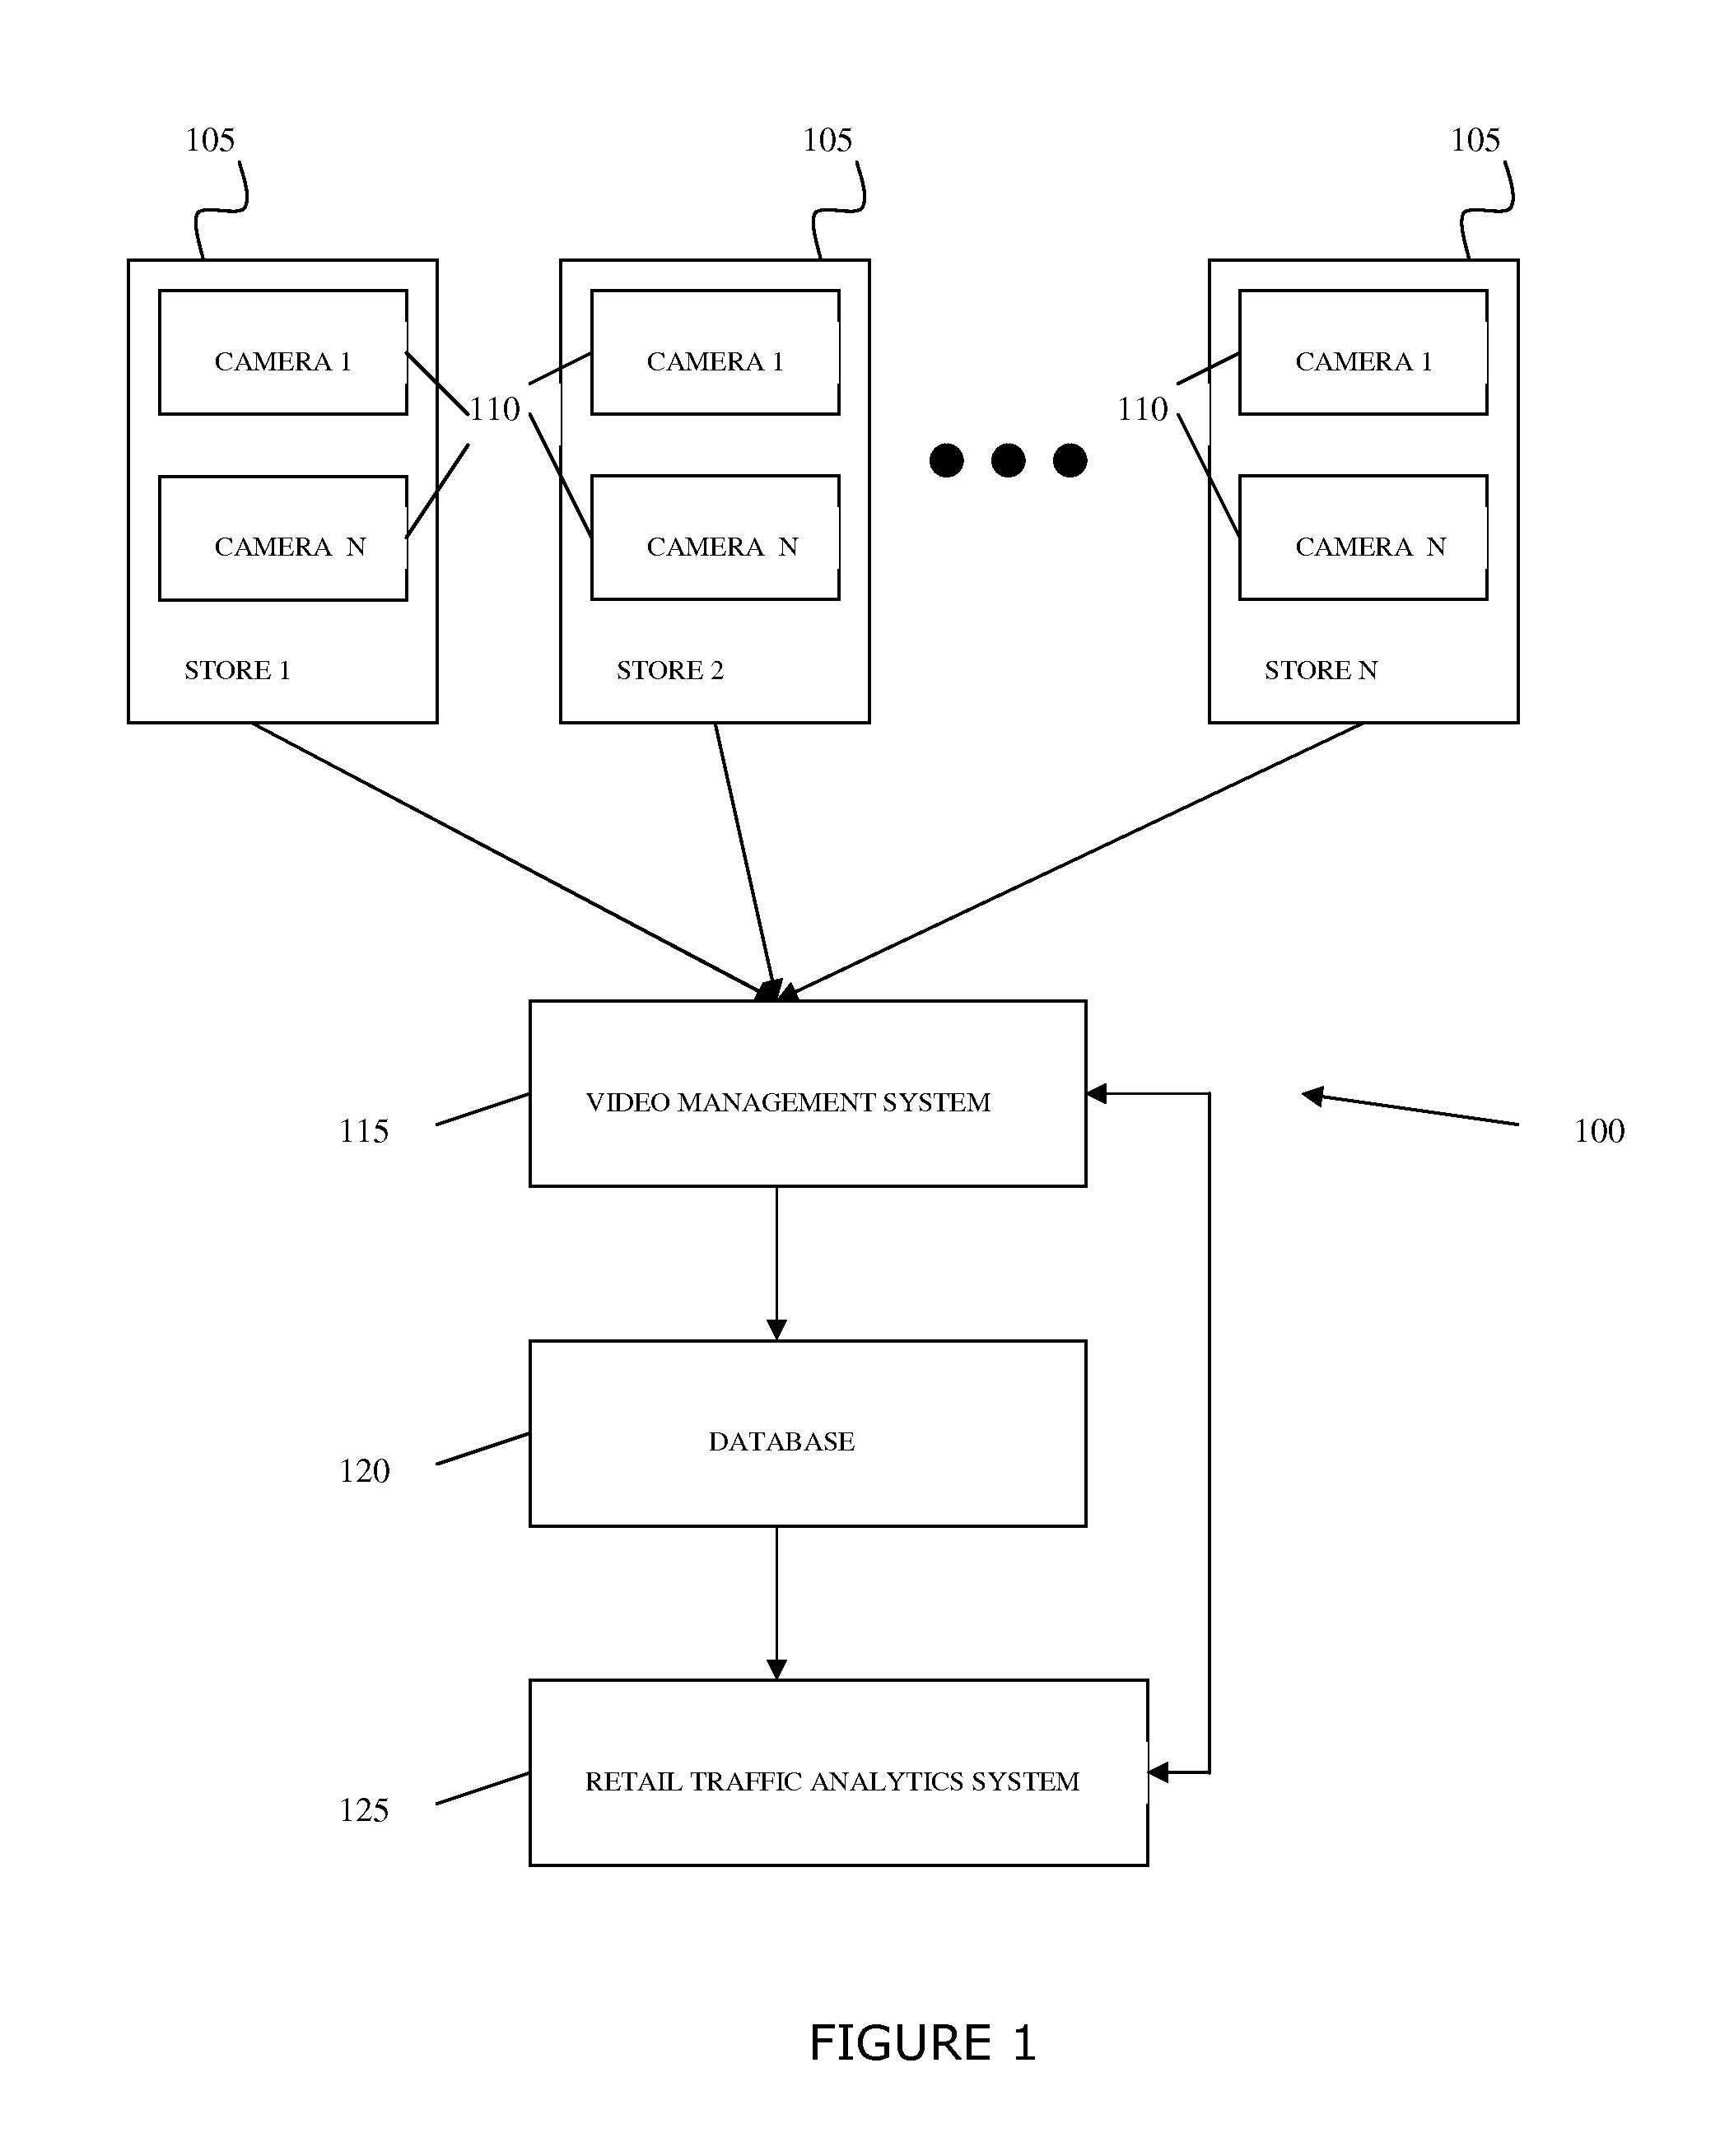 System and Method for Capturing, Storing, Analyzing and Displaying Data Related to the Movements of Objects